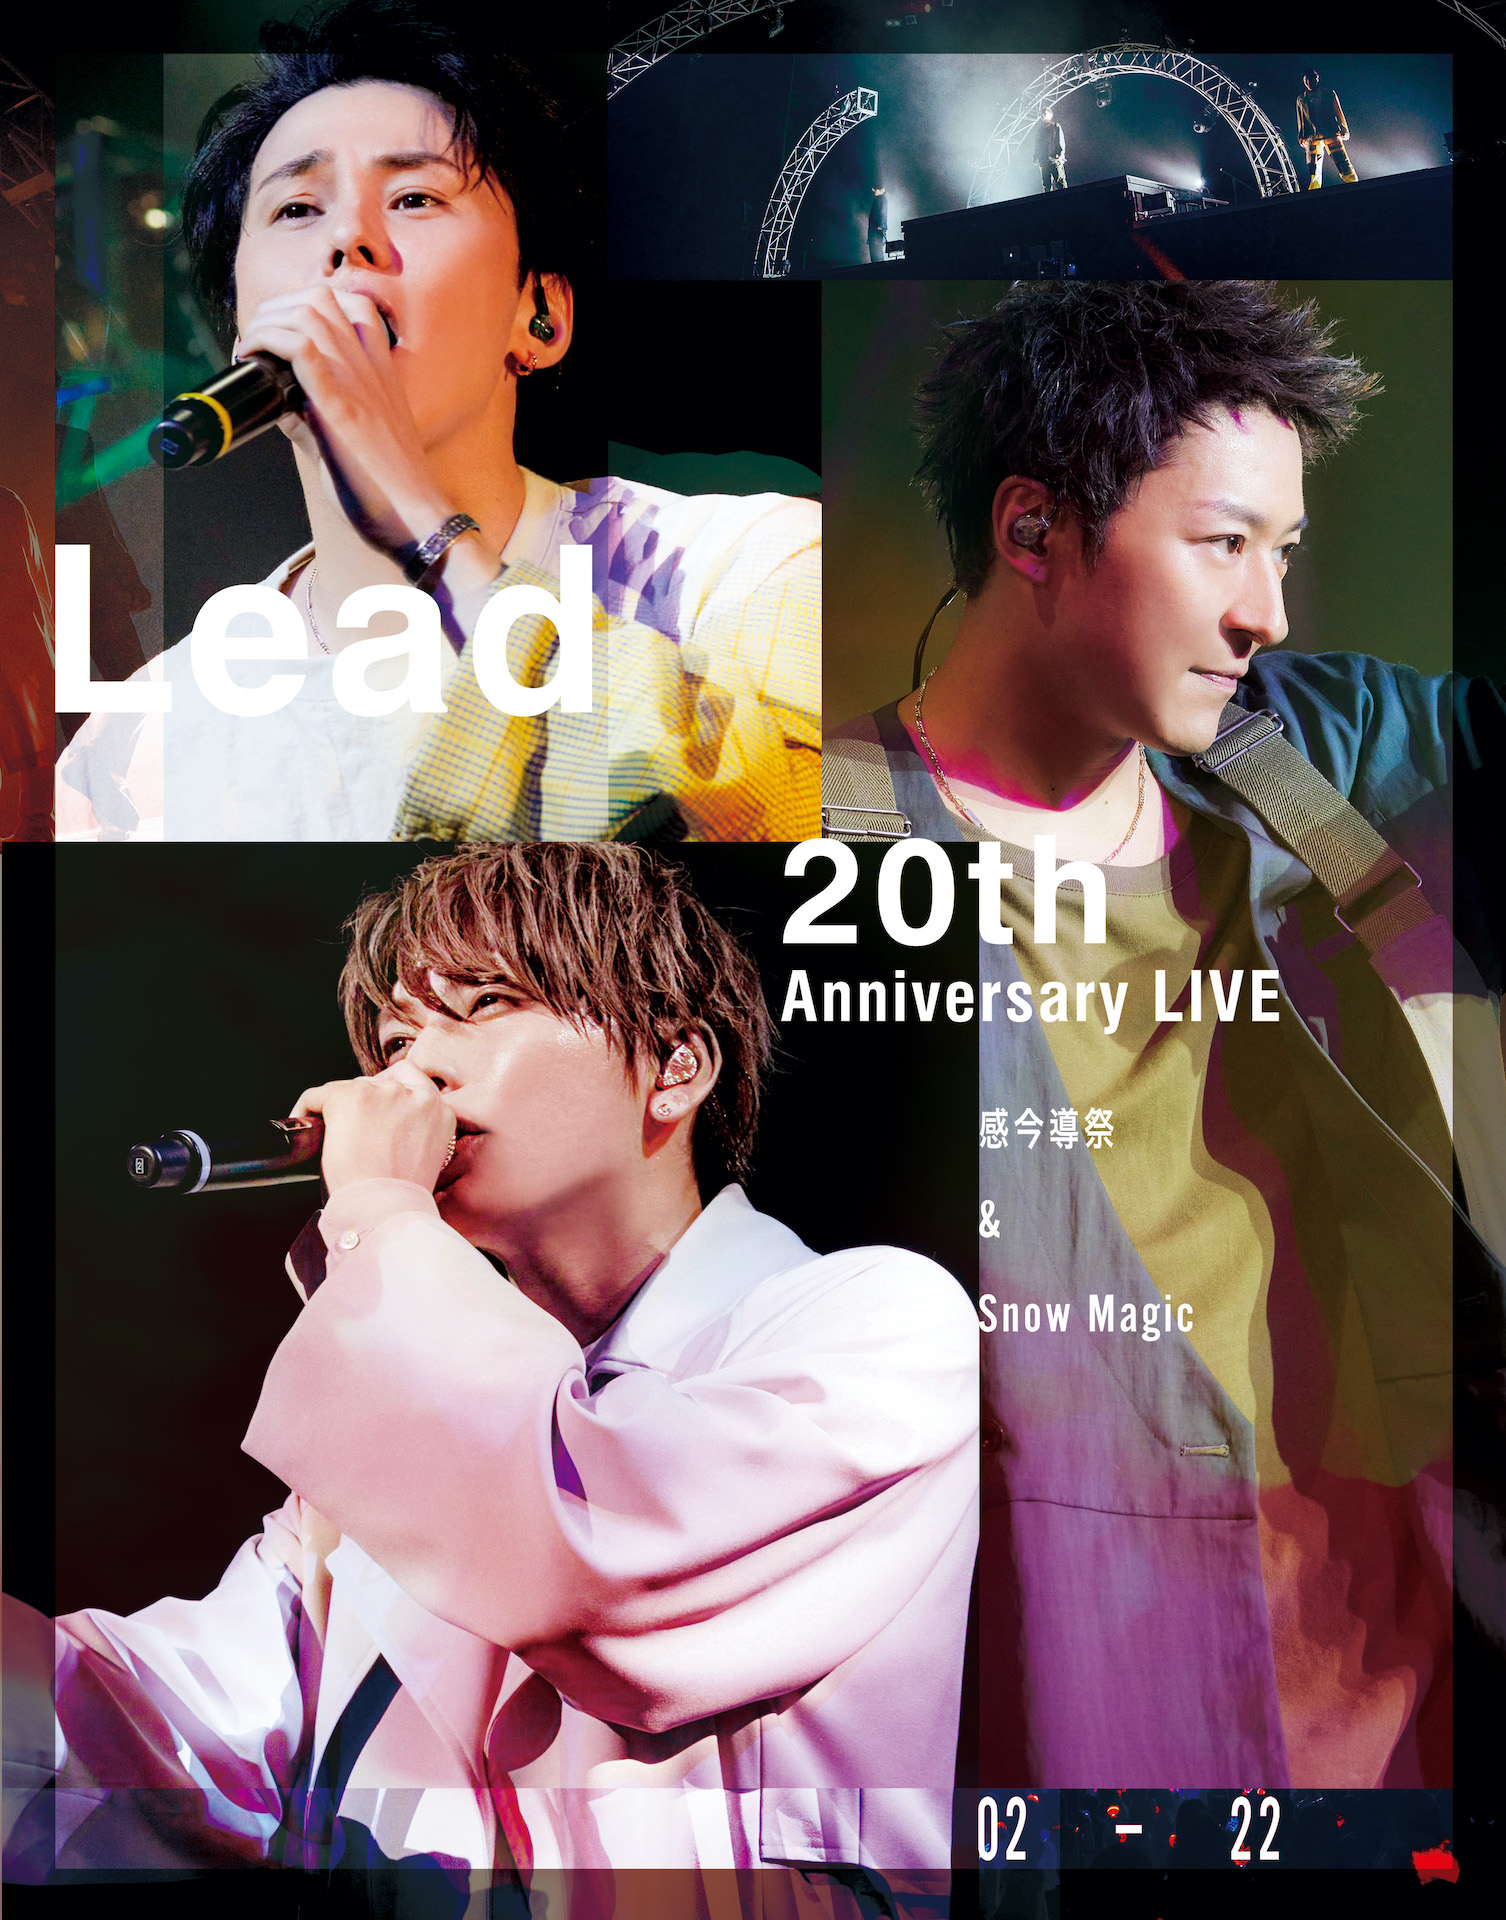 "Lead 20th Anniversary Live ~KANKONDOUSAI & Snow Magic~" Normal Edition (2Blu-ray) Release on March 22th, 2023